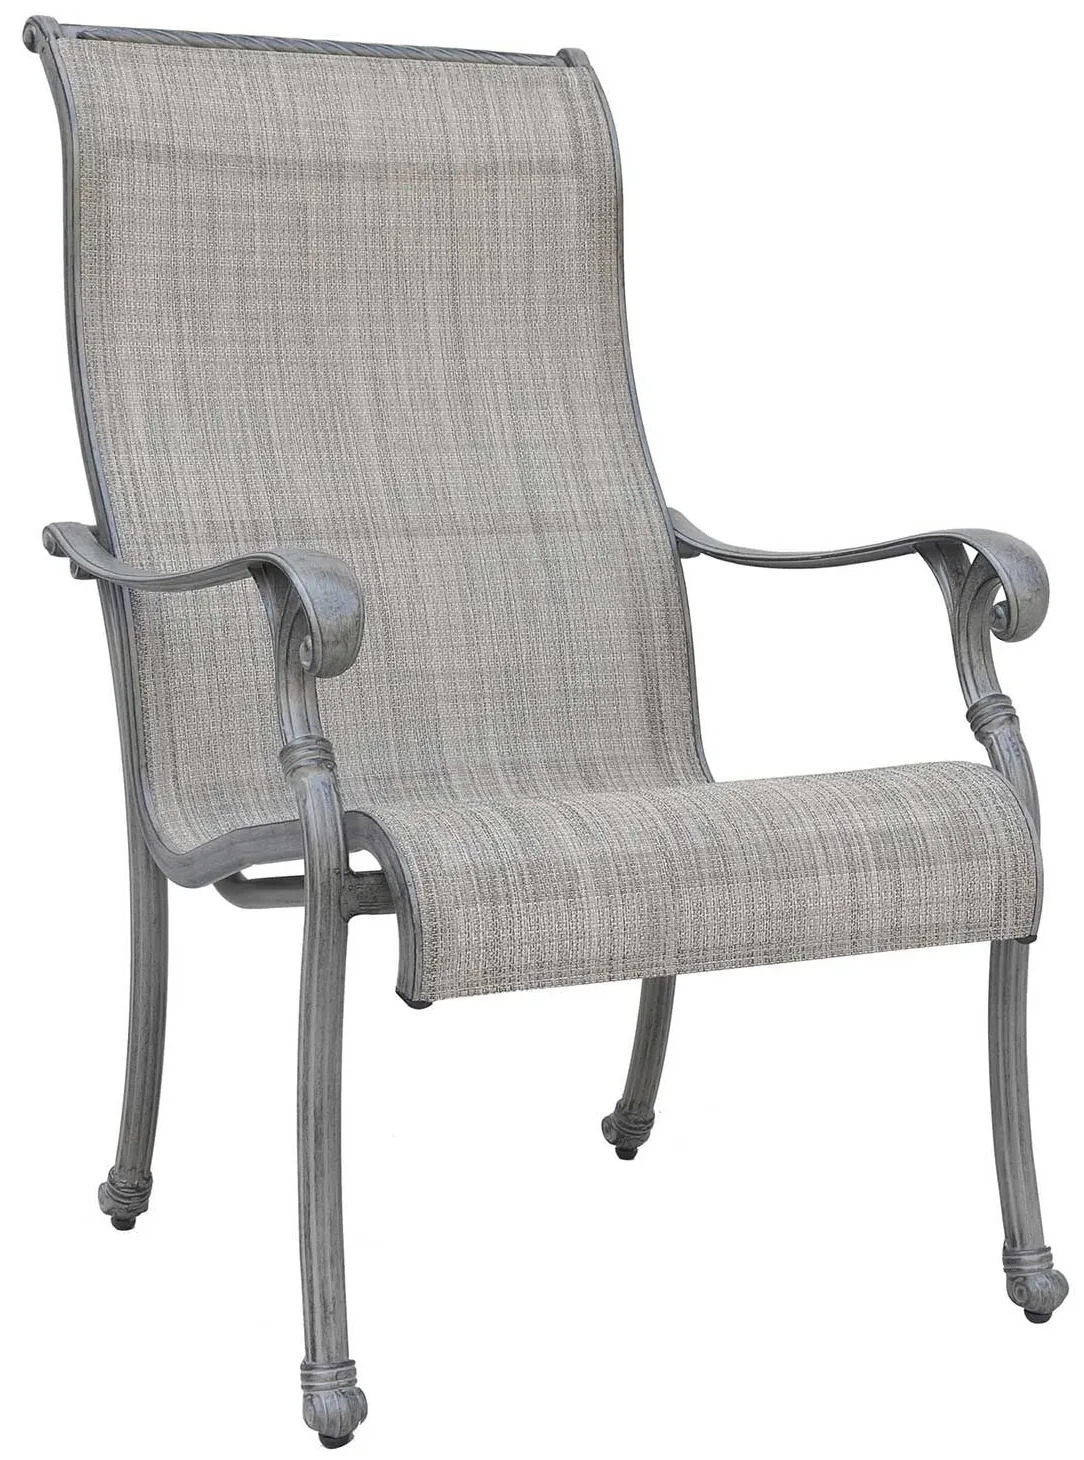 Claremont Patio Sling Dining Chair